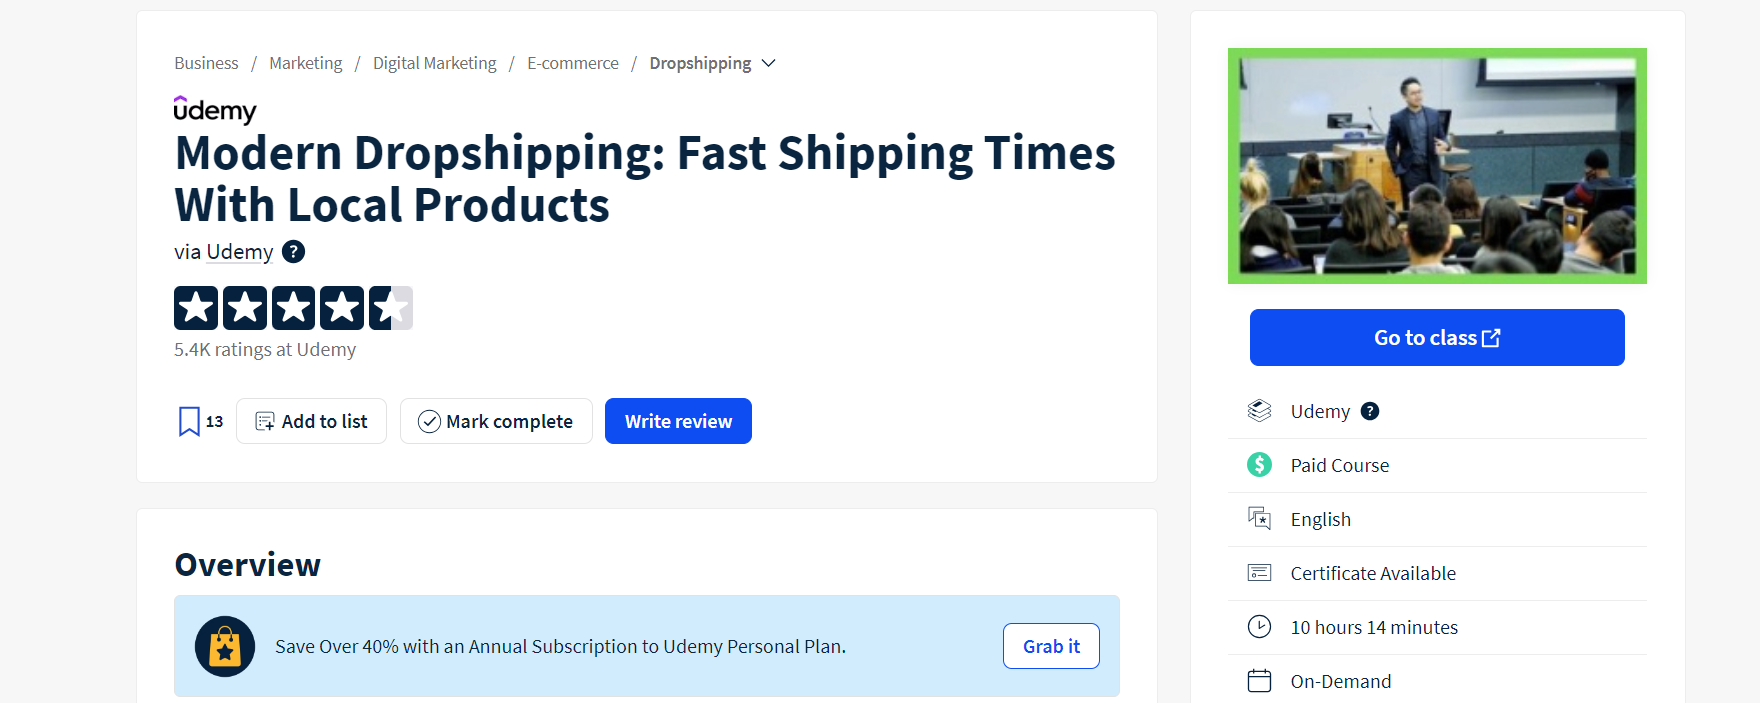 Kevin Princeton’s Modern Dropshipping: Fast Shipping Times With Local Products on Udemy is a preferred choice for those keen on capitalizing on local dropshipping suppliers for quicker shipping times. 